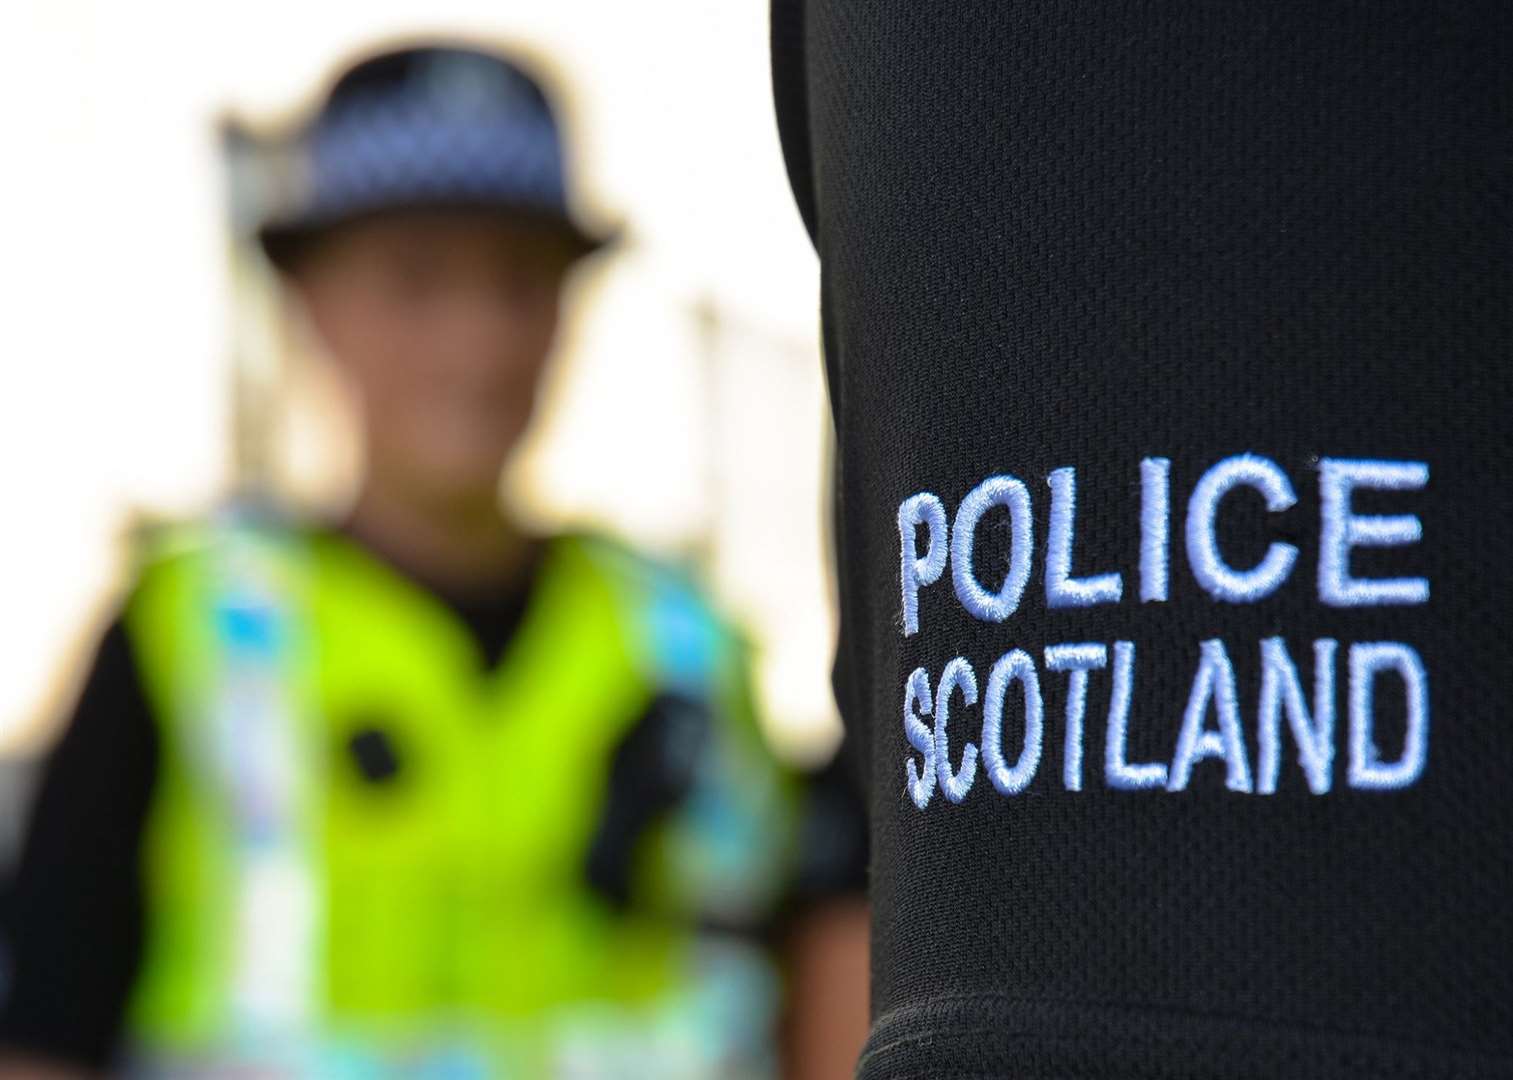 A consultation has launched focusing on planned legislation for police complaints and misconduct.